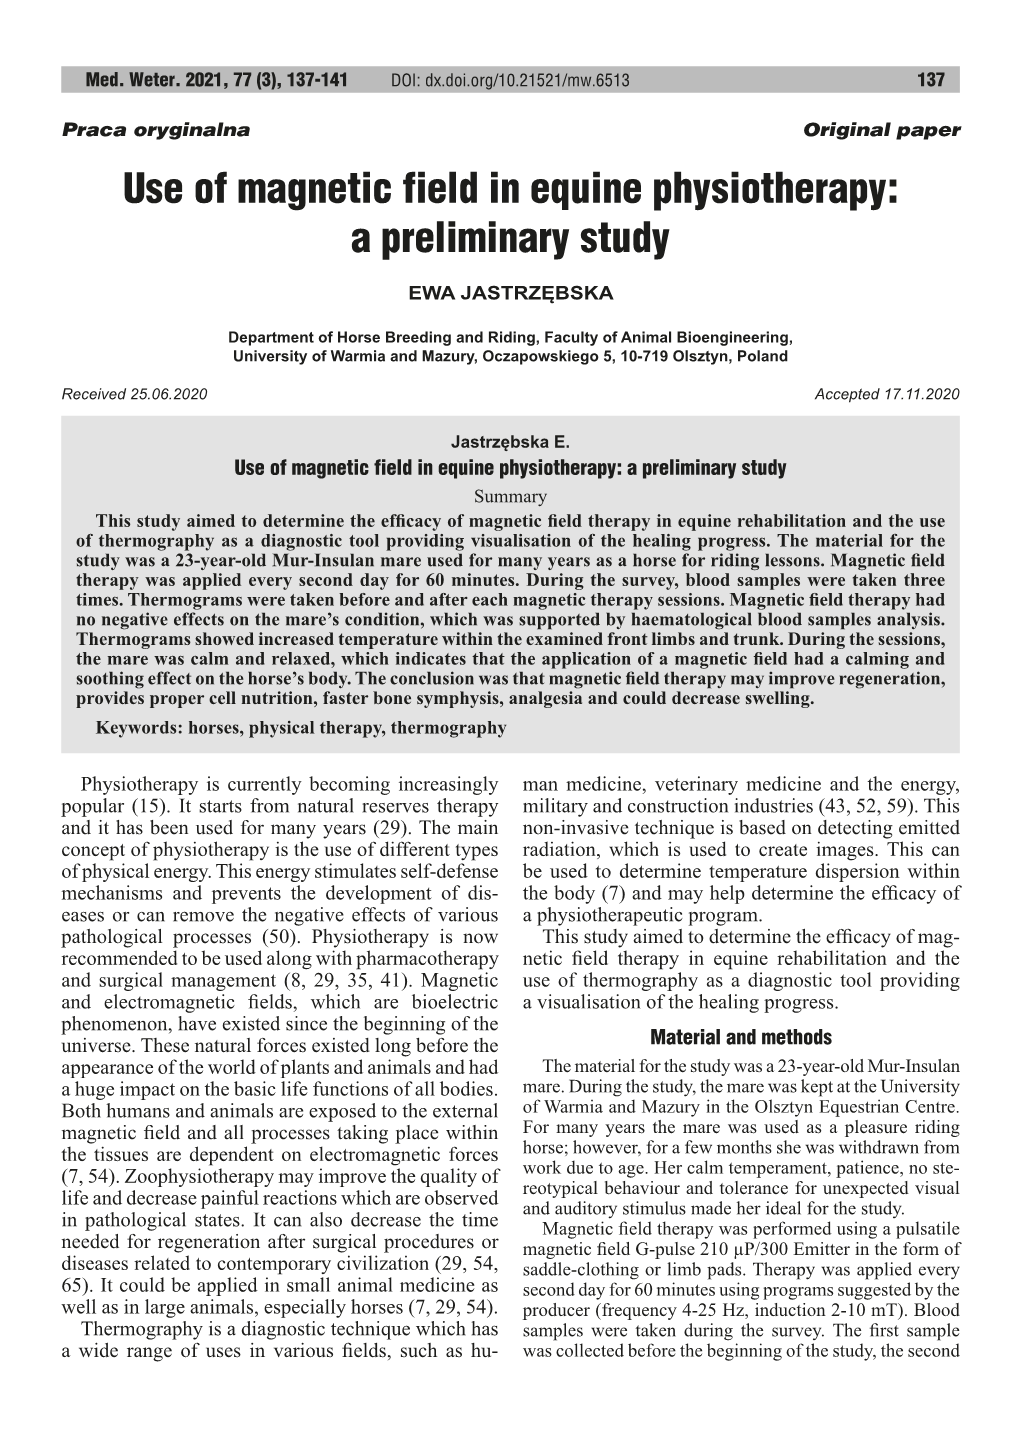 Use of Magnetic Field in Equine Physiotherapy: a Preliminary Study